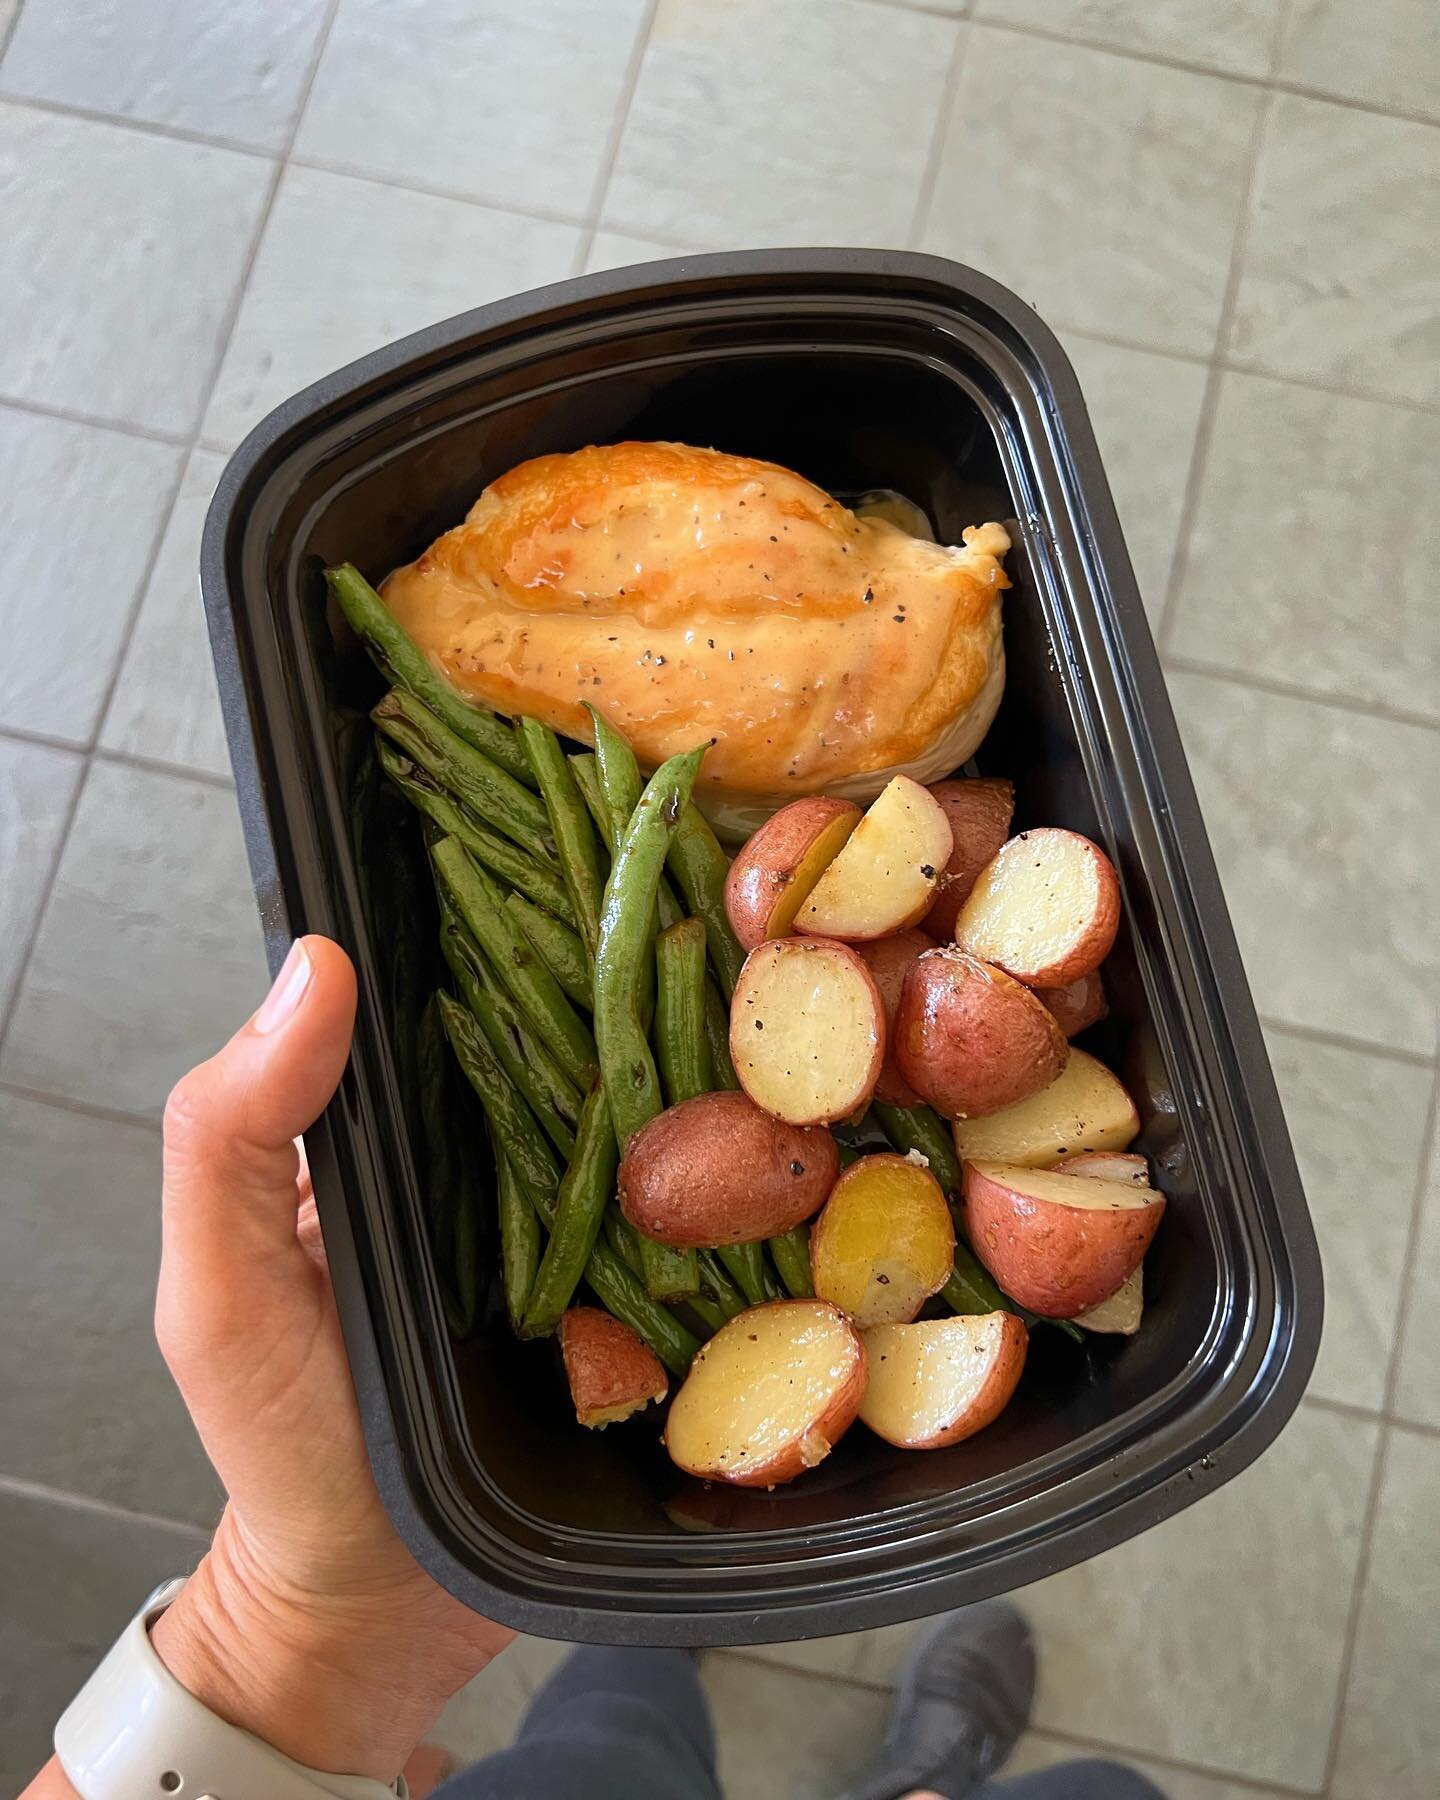 keeping it really simple ~ Creamy Dijon Chicken with Roasted Potatoes and Green Beans